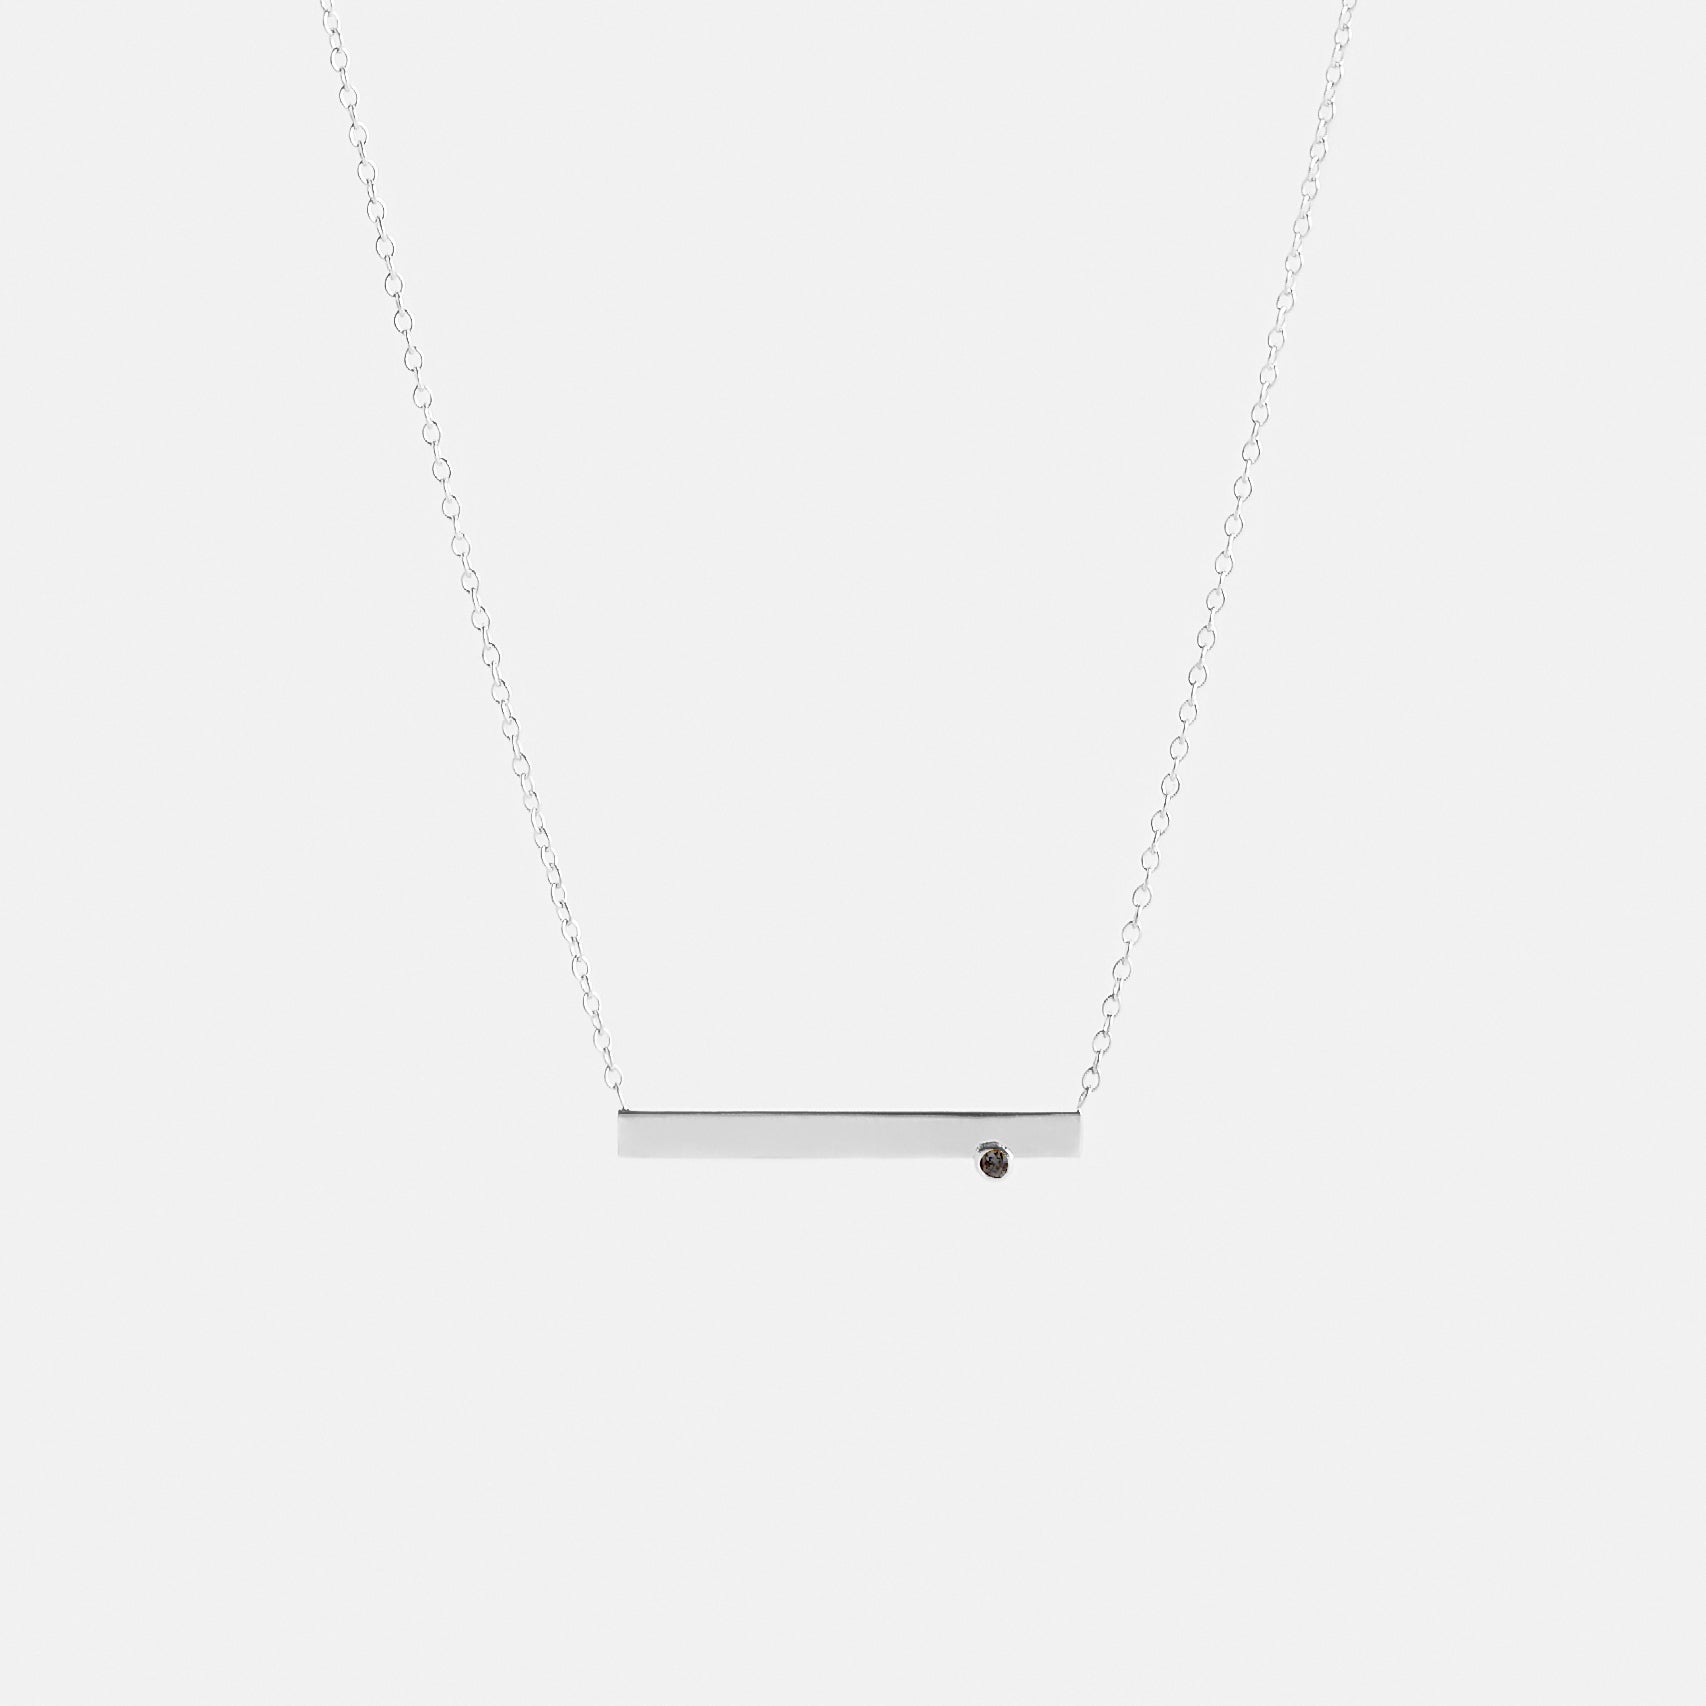 Lane Cool Necklace in Sterling Silver set with Black Diamond By SHW Fine Jewelry NYC